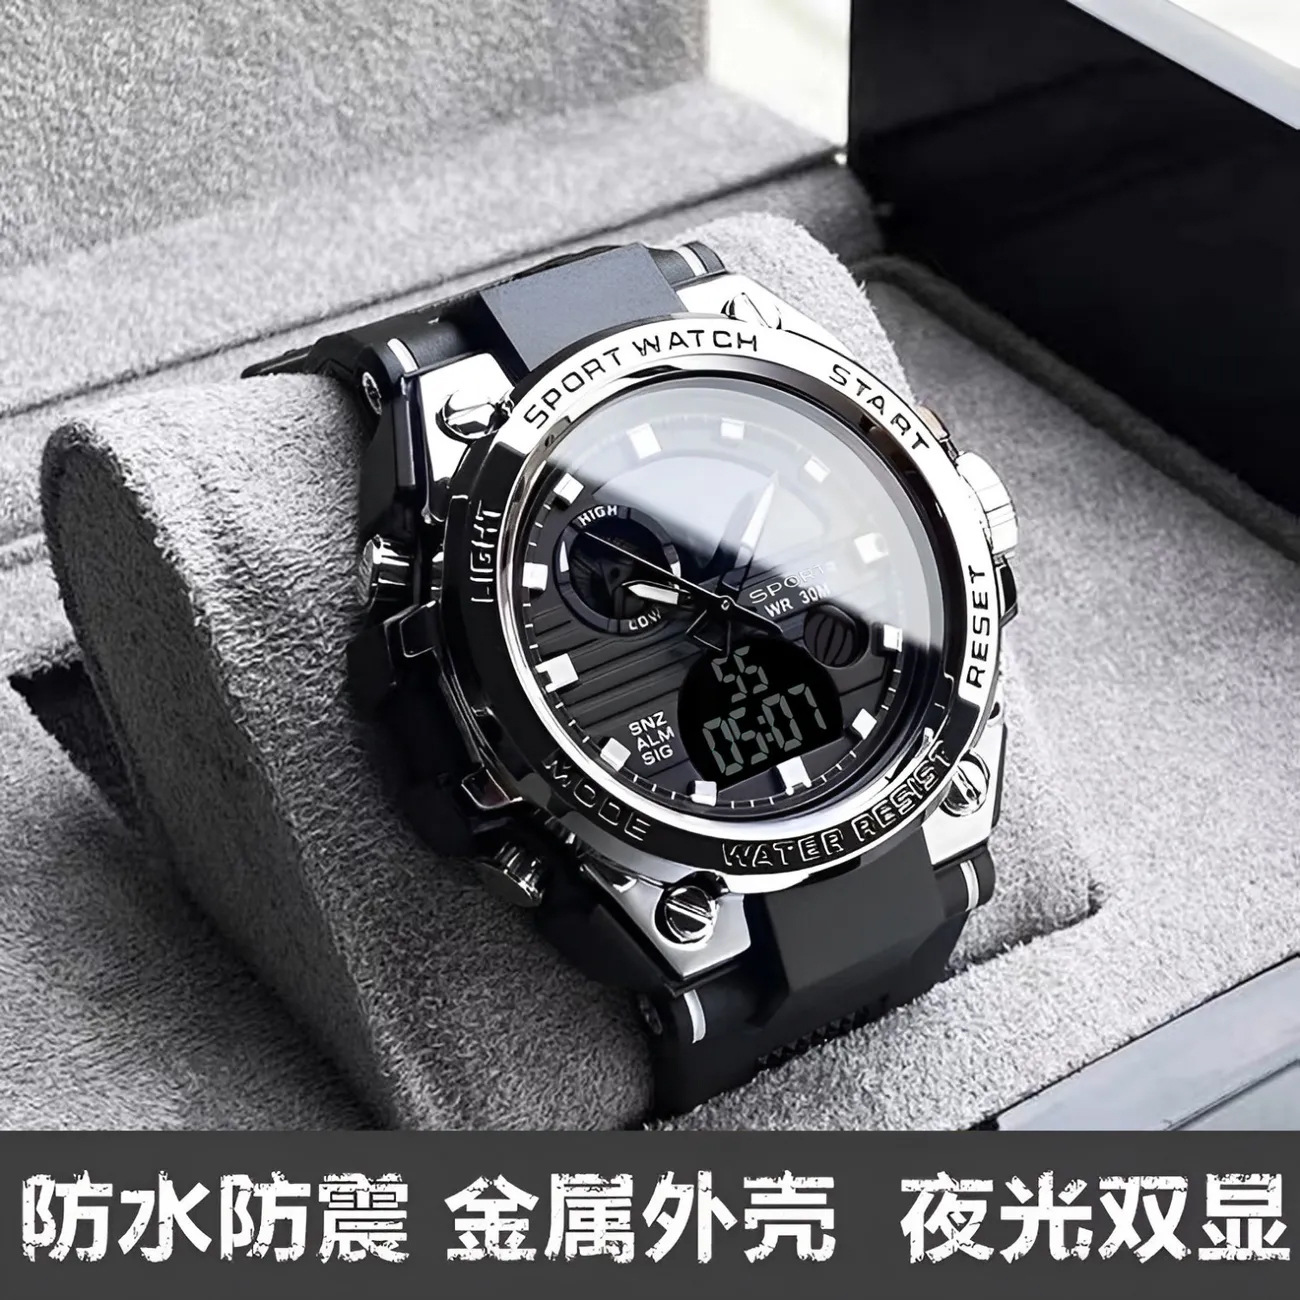 Authentic watch for male junior high school students with high aesthetic value 2023 new sports multifunctional waterproof luminous electronic watch